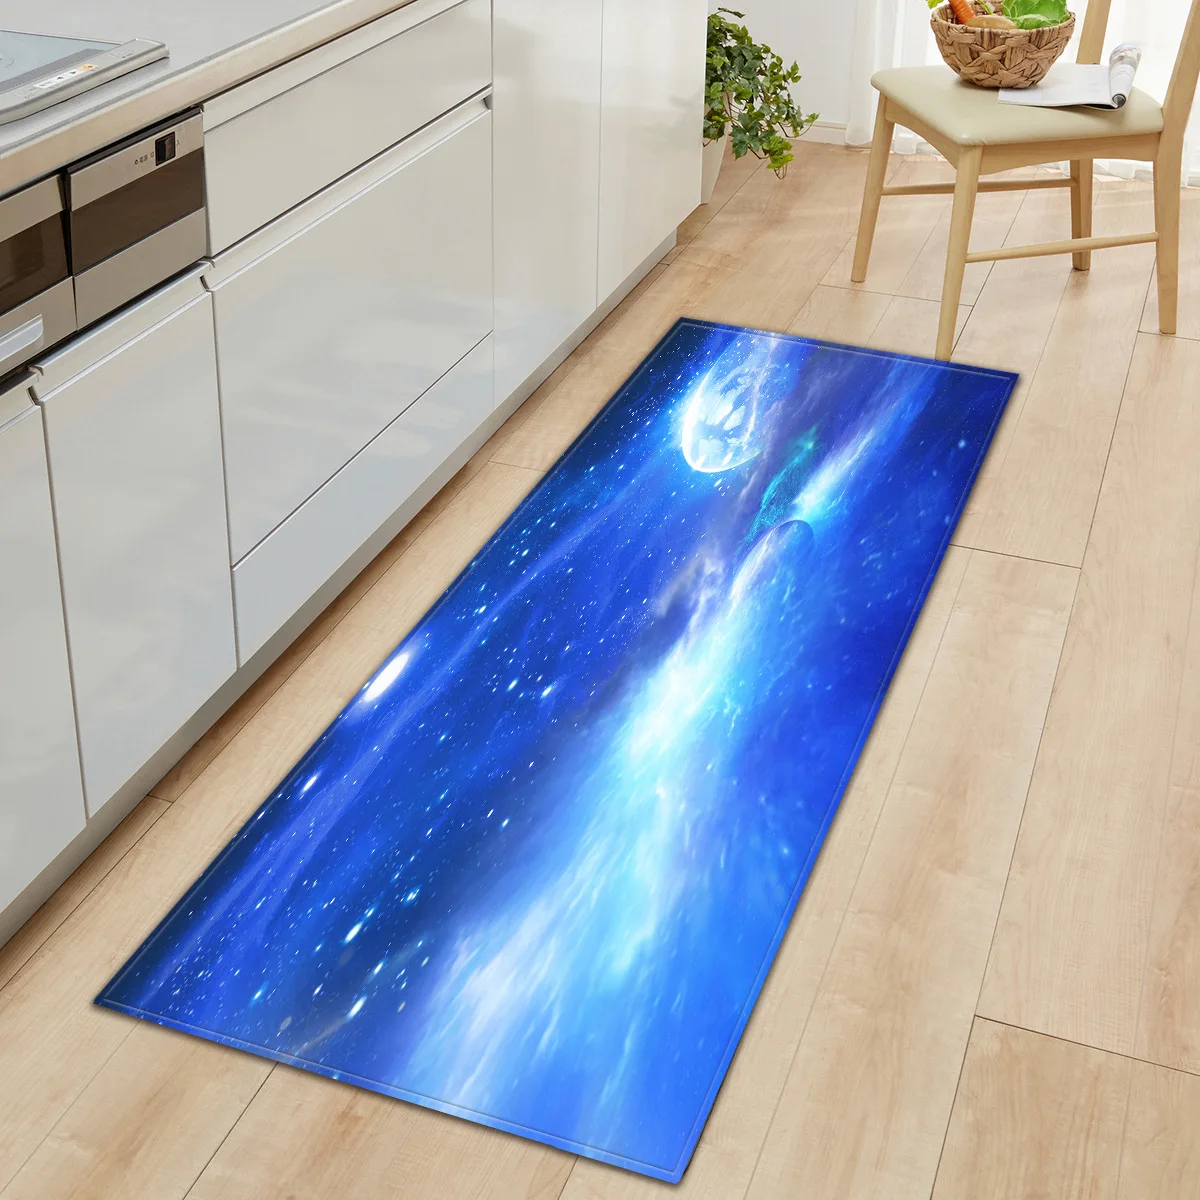 Beautiful Colorful Starry Galaxy Pattern Printed Rectangular Felt Rug Bedroom Rug All Kitchen and Home Decoration Floor Mats